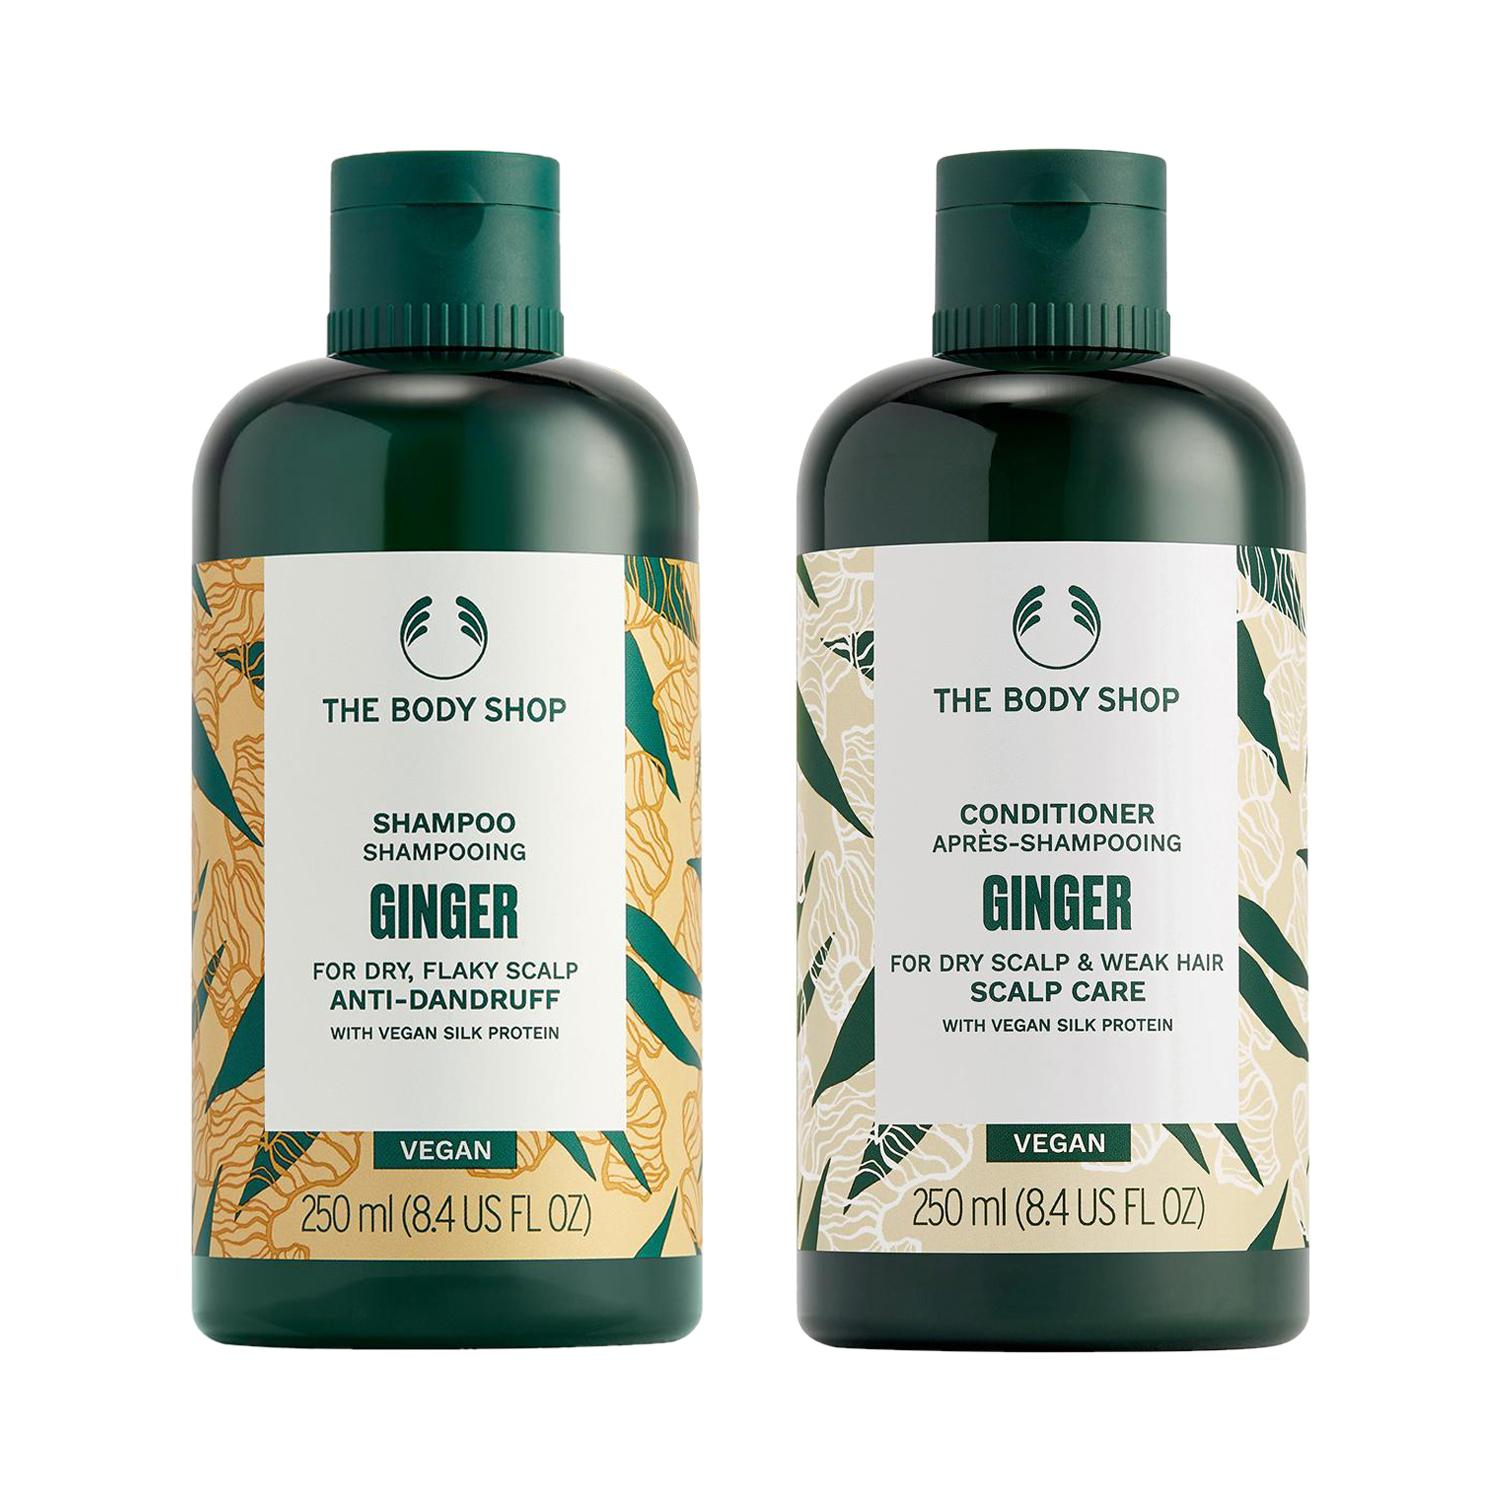 The Body Shop | The Body Shop Ginger Shampoo & Conditioner Combo